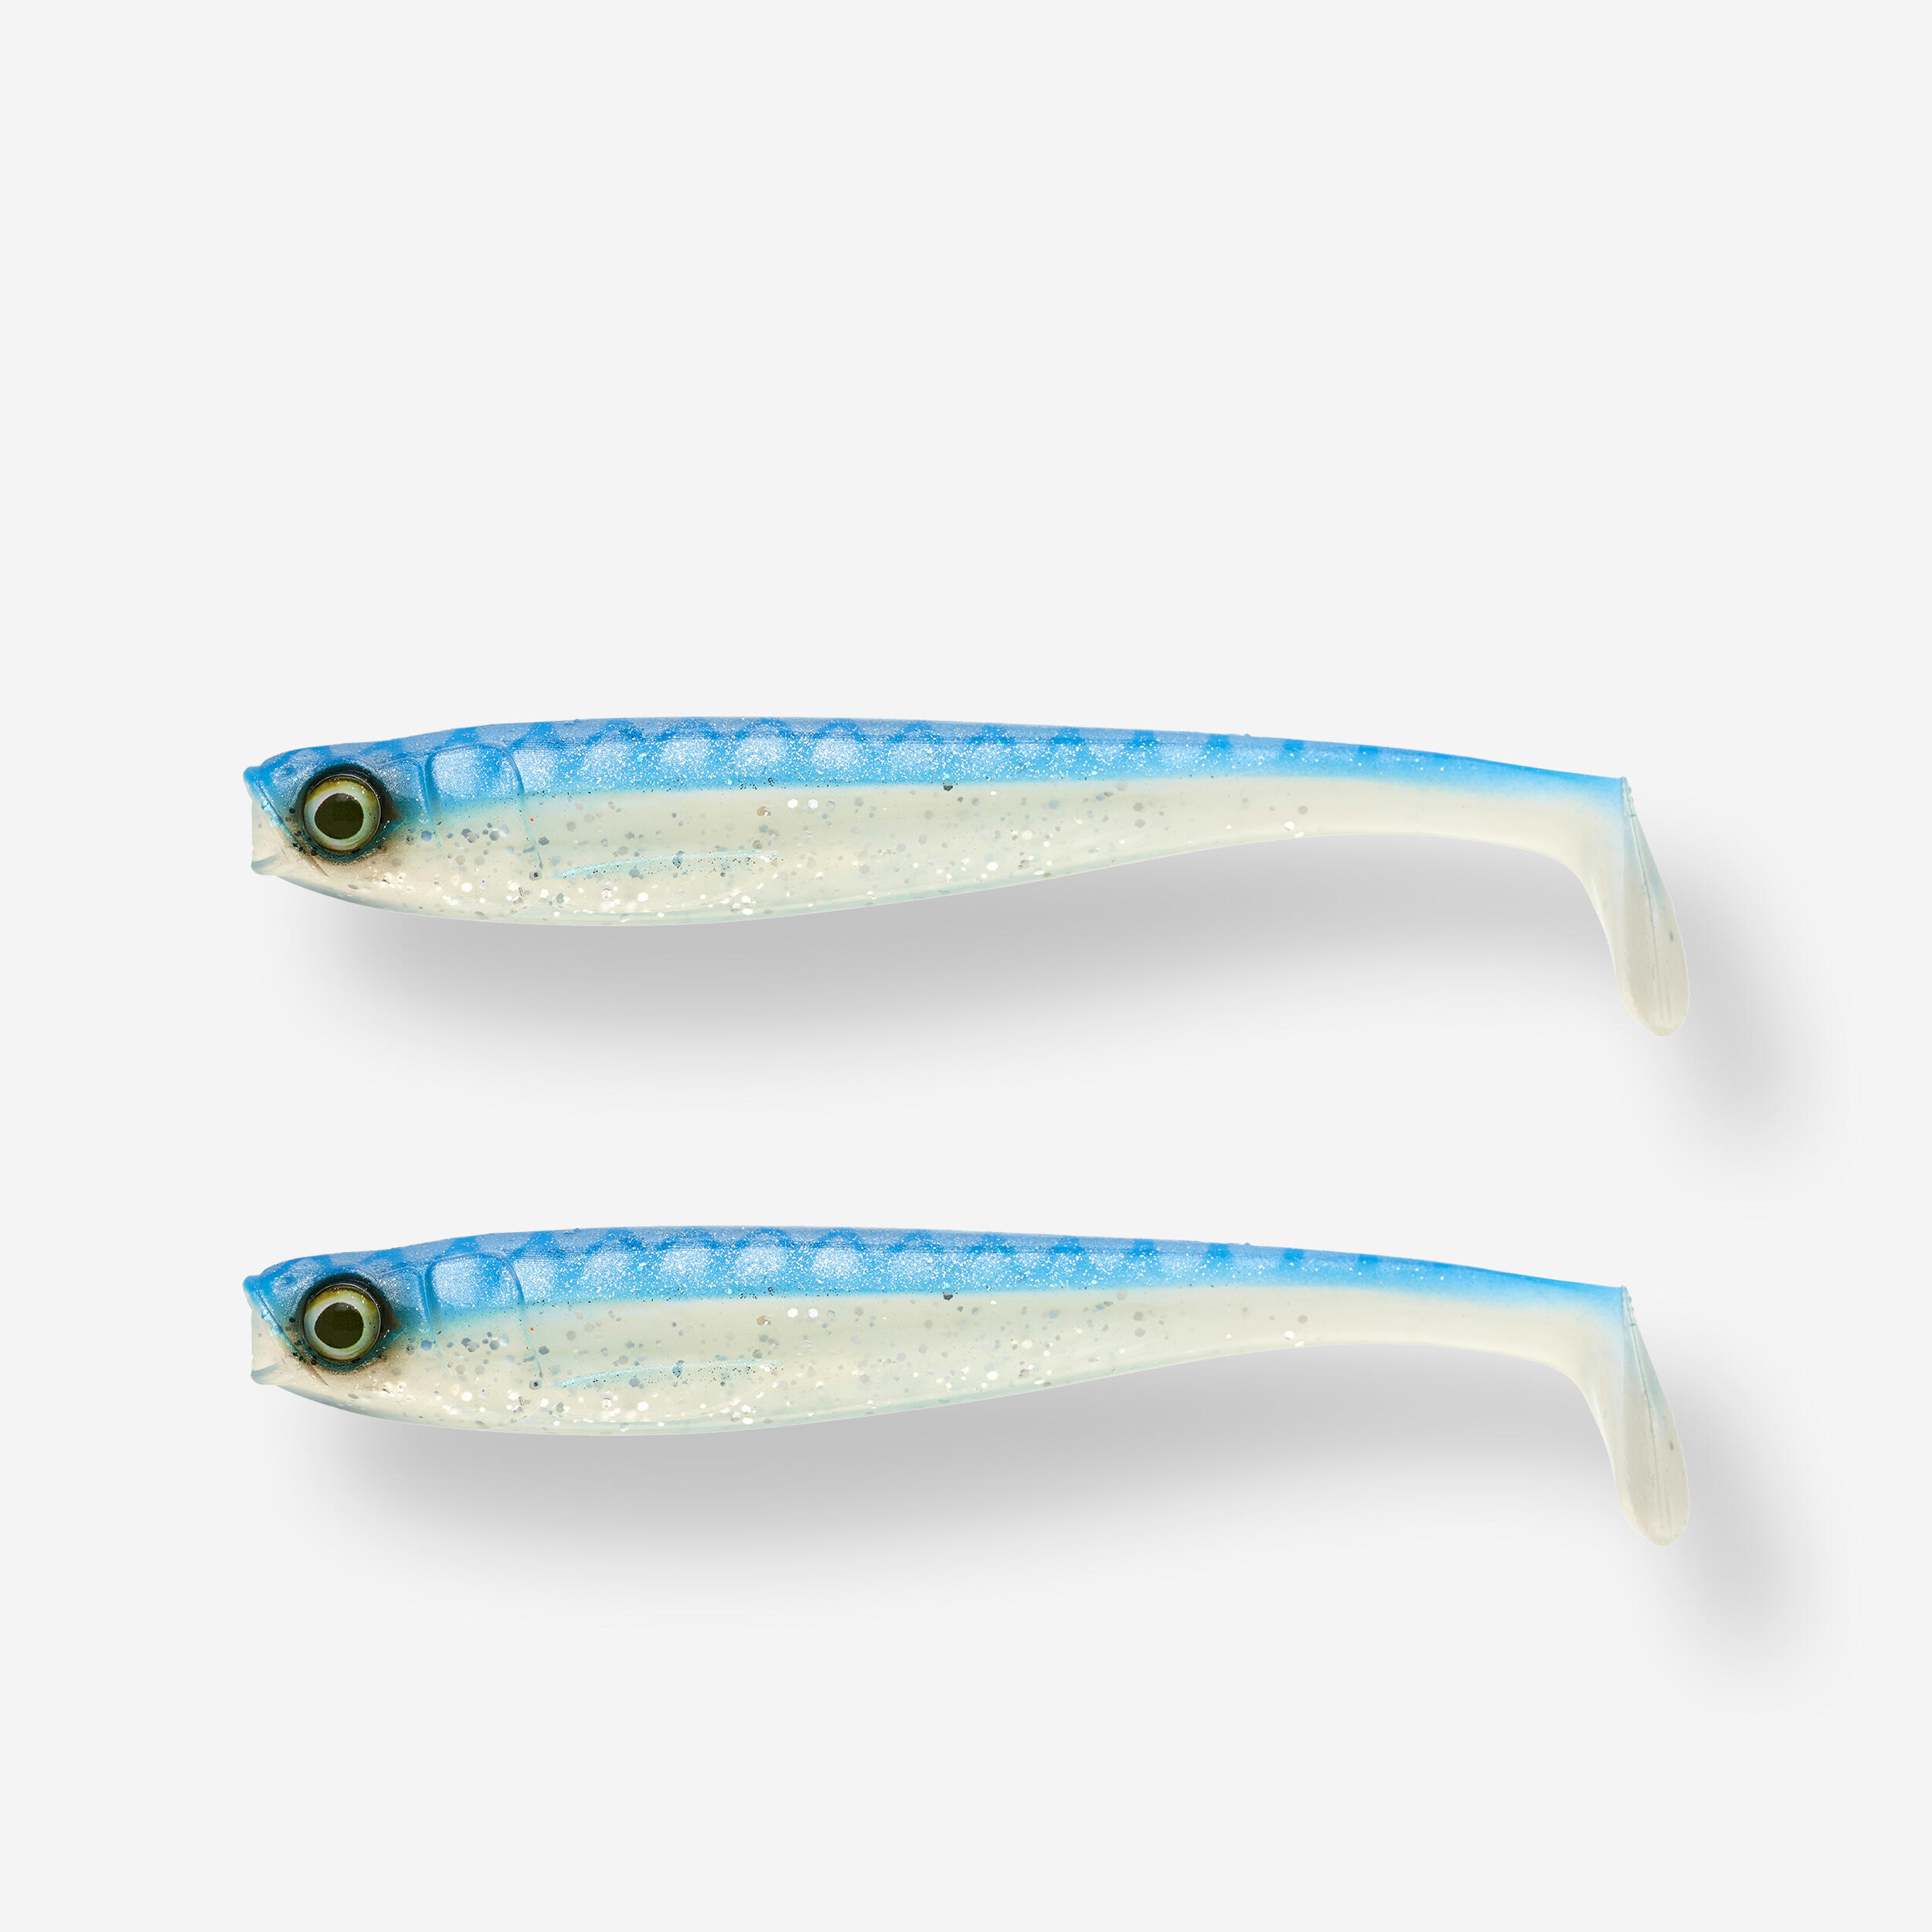 ROGEN SOFT SHAD PIKE LURE 160 BLUE X2 1/3